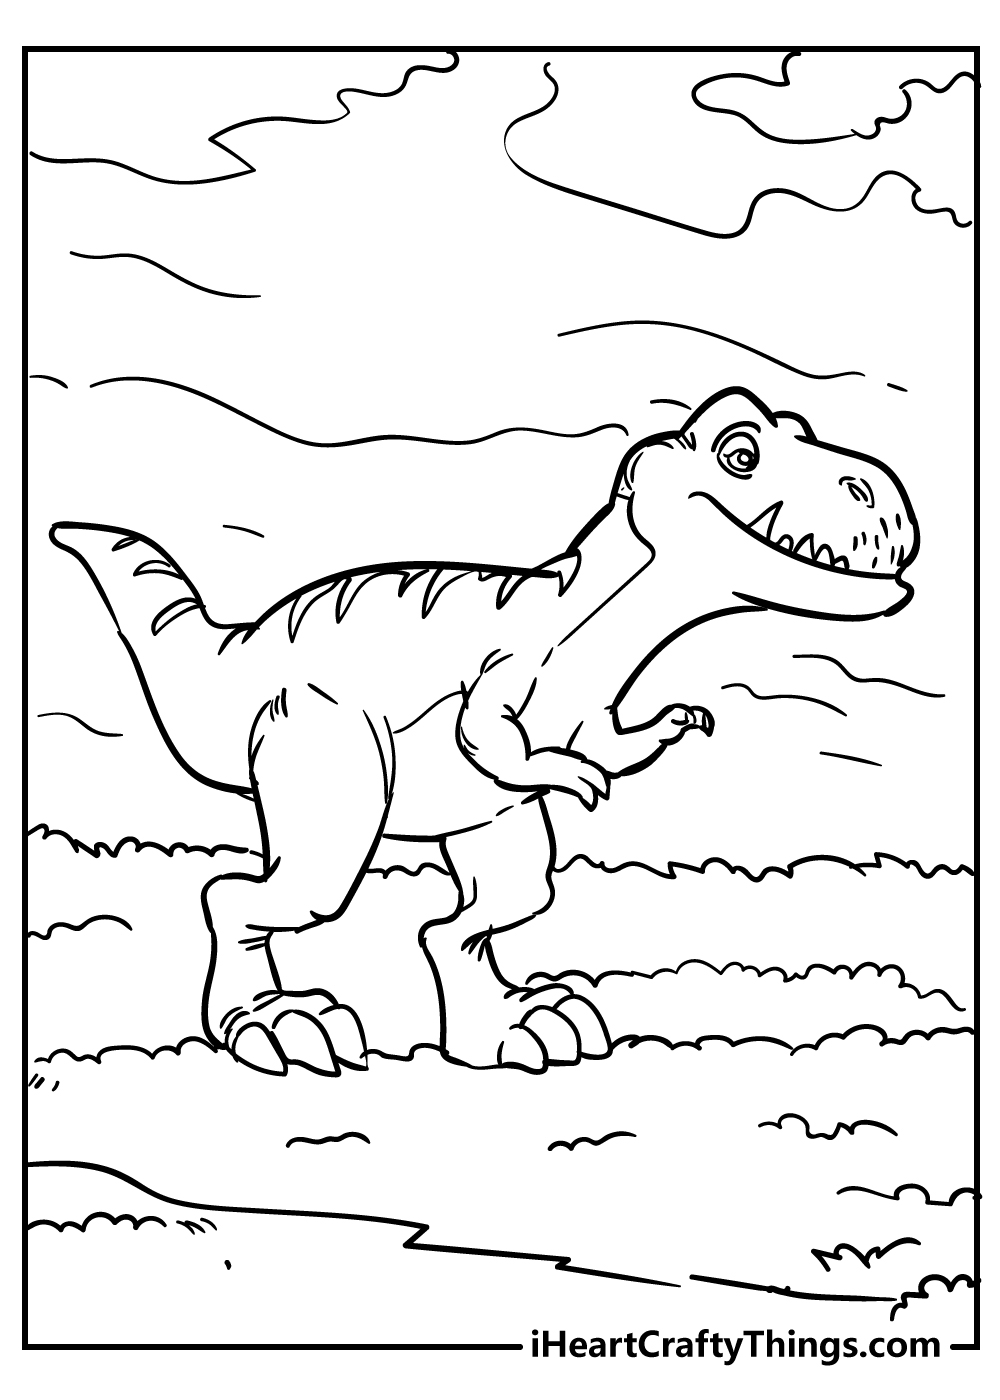 t-rex tyrannosaurus coloring book for adults free printable